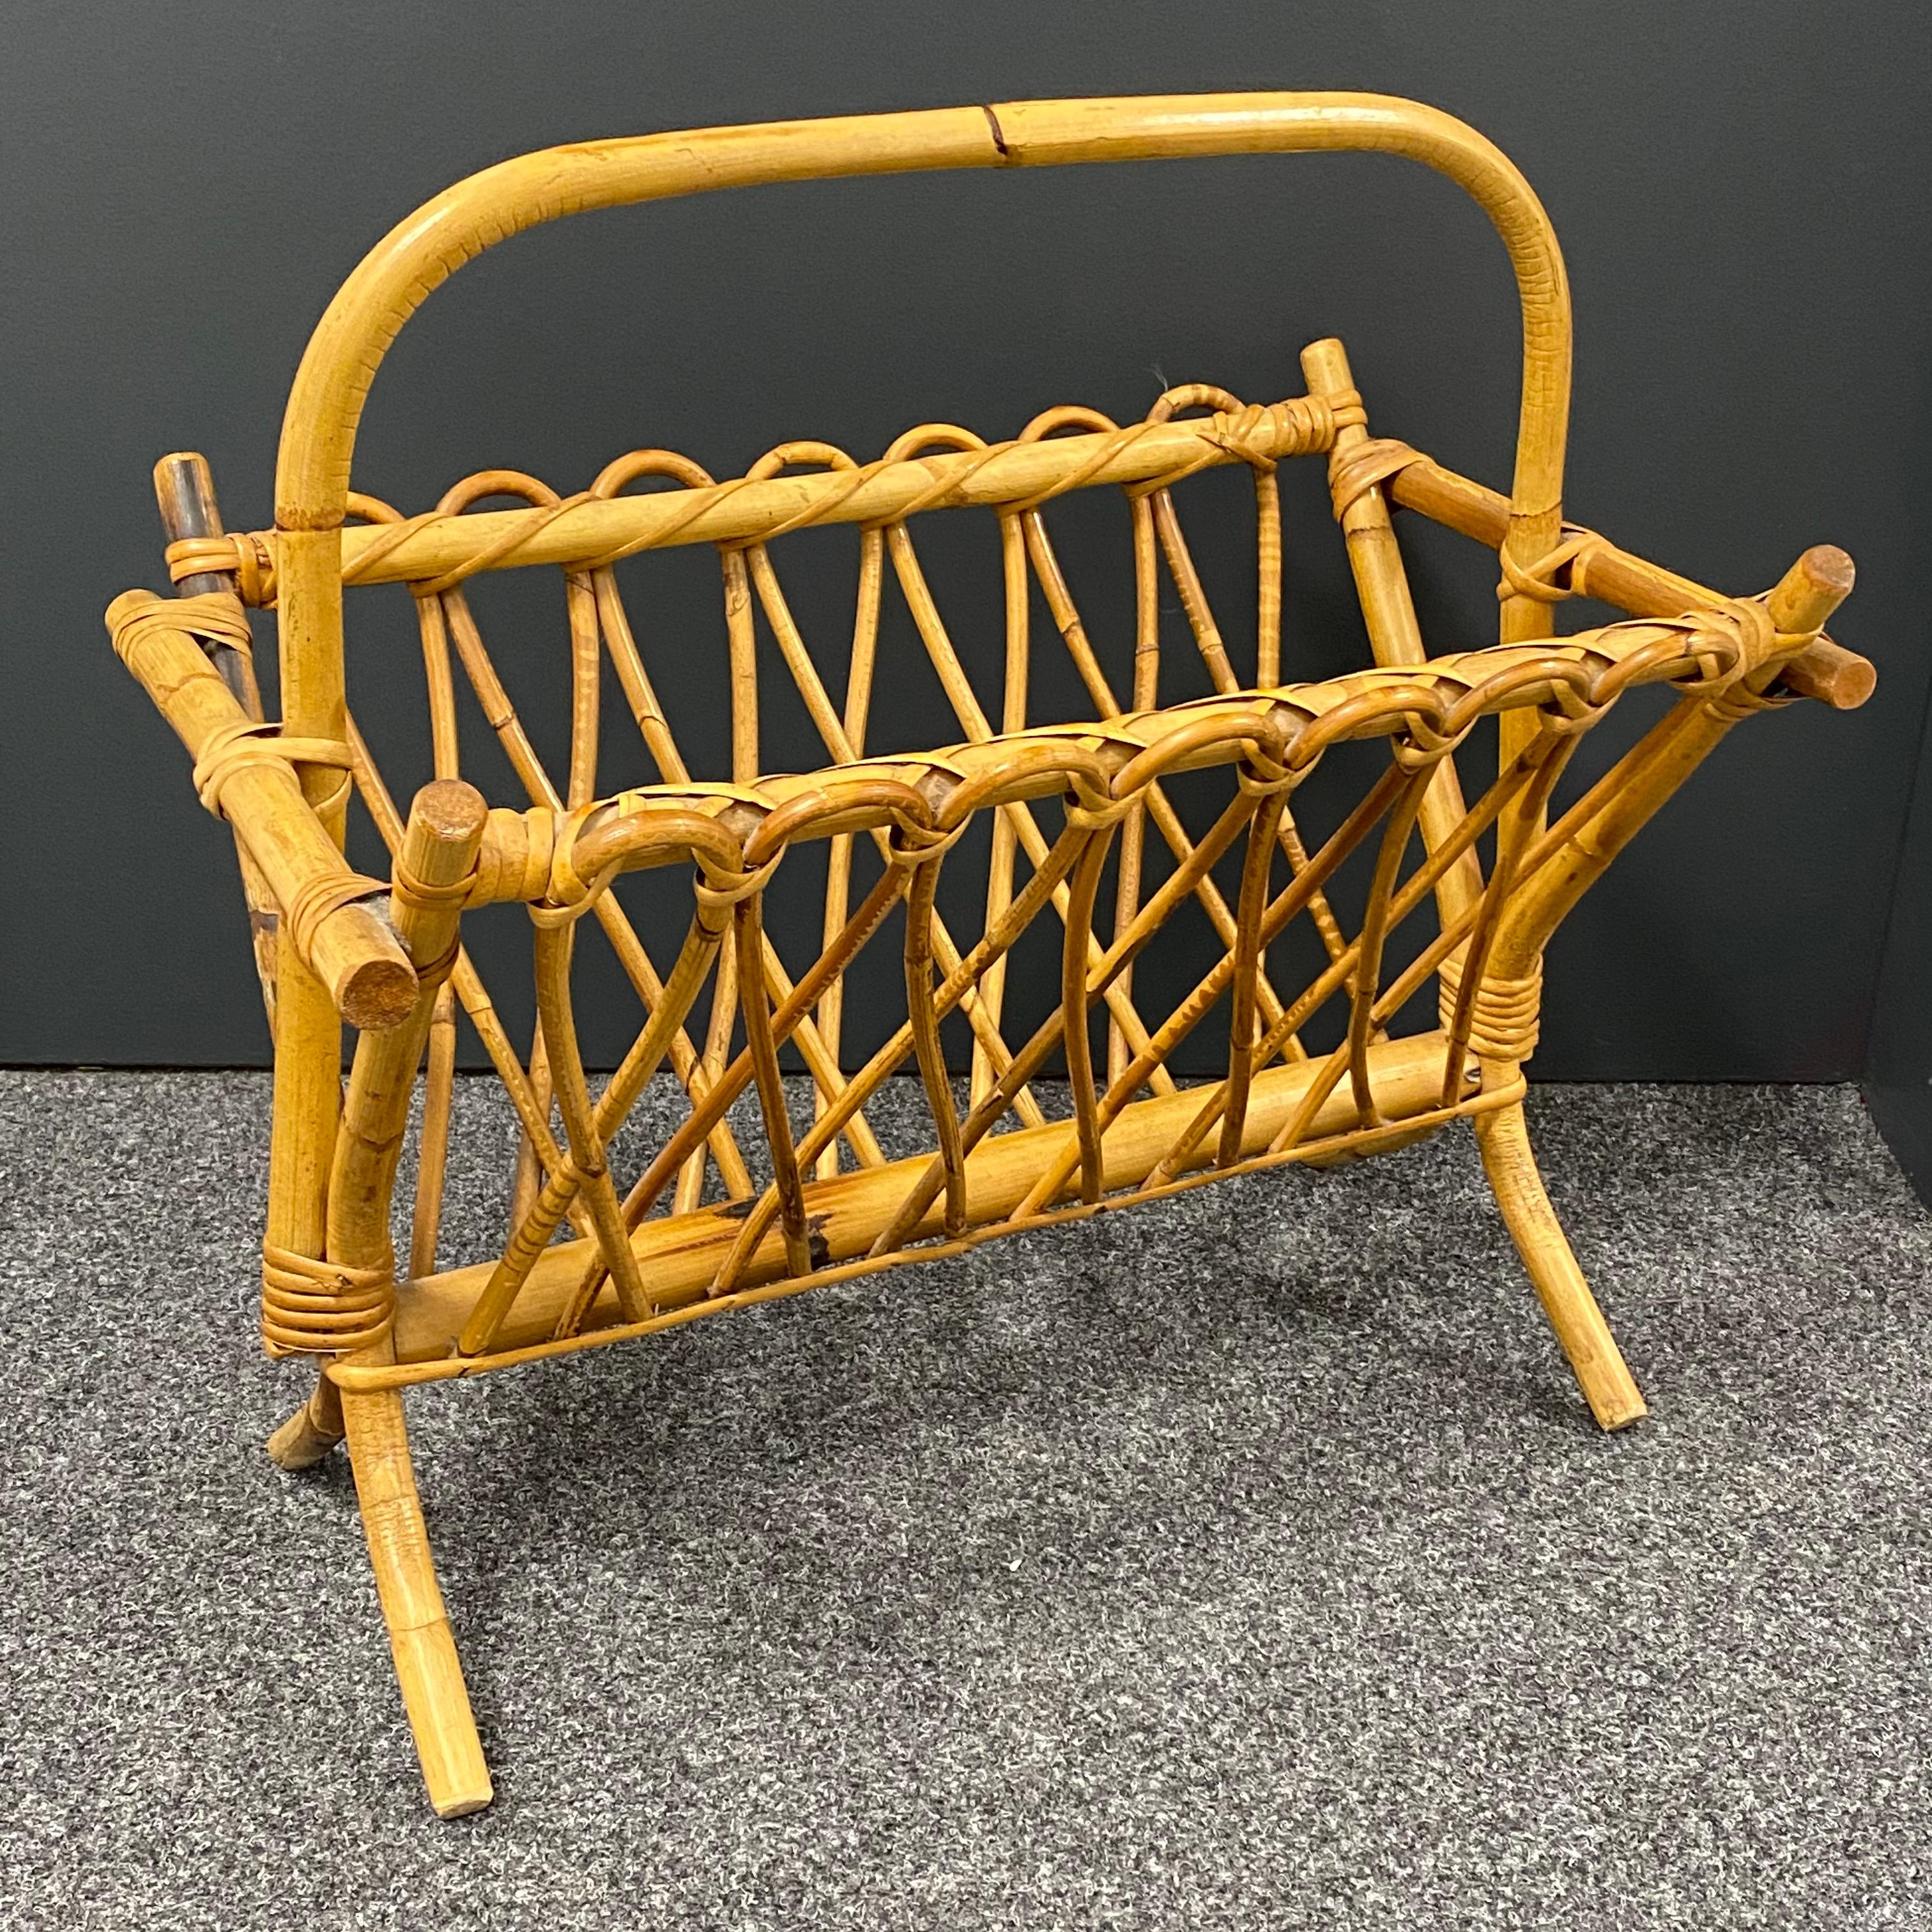 Offered is an absolutely stunning, 1970s German magazine rack stand. Original midcentury era. Minor patina gives this piece a classy statement.